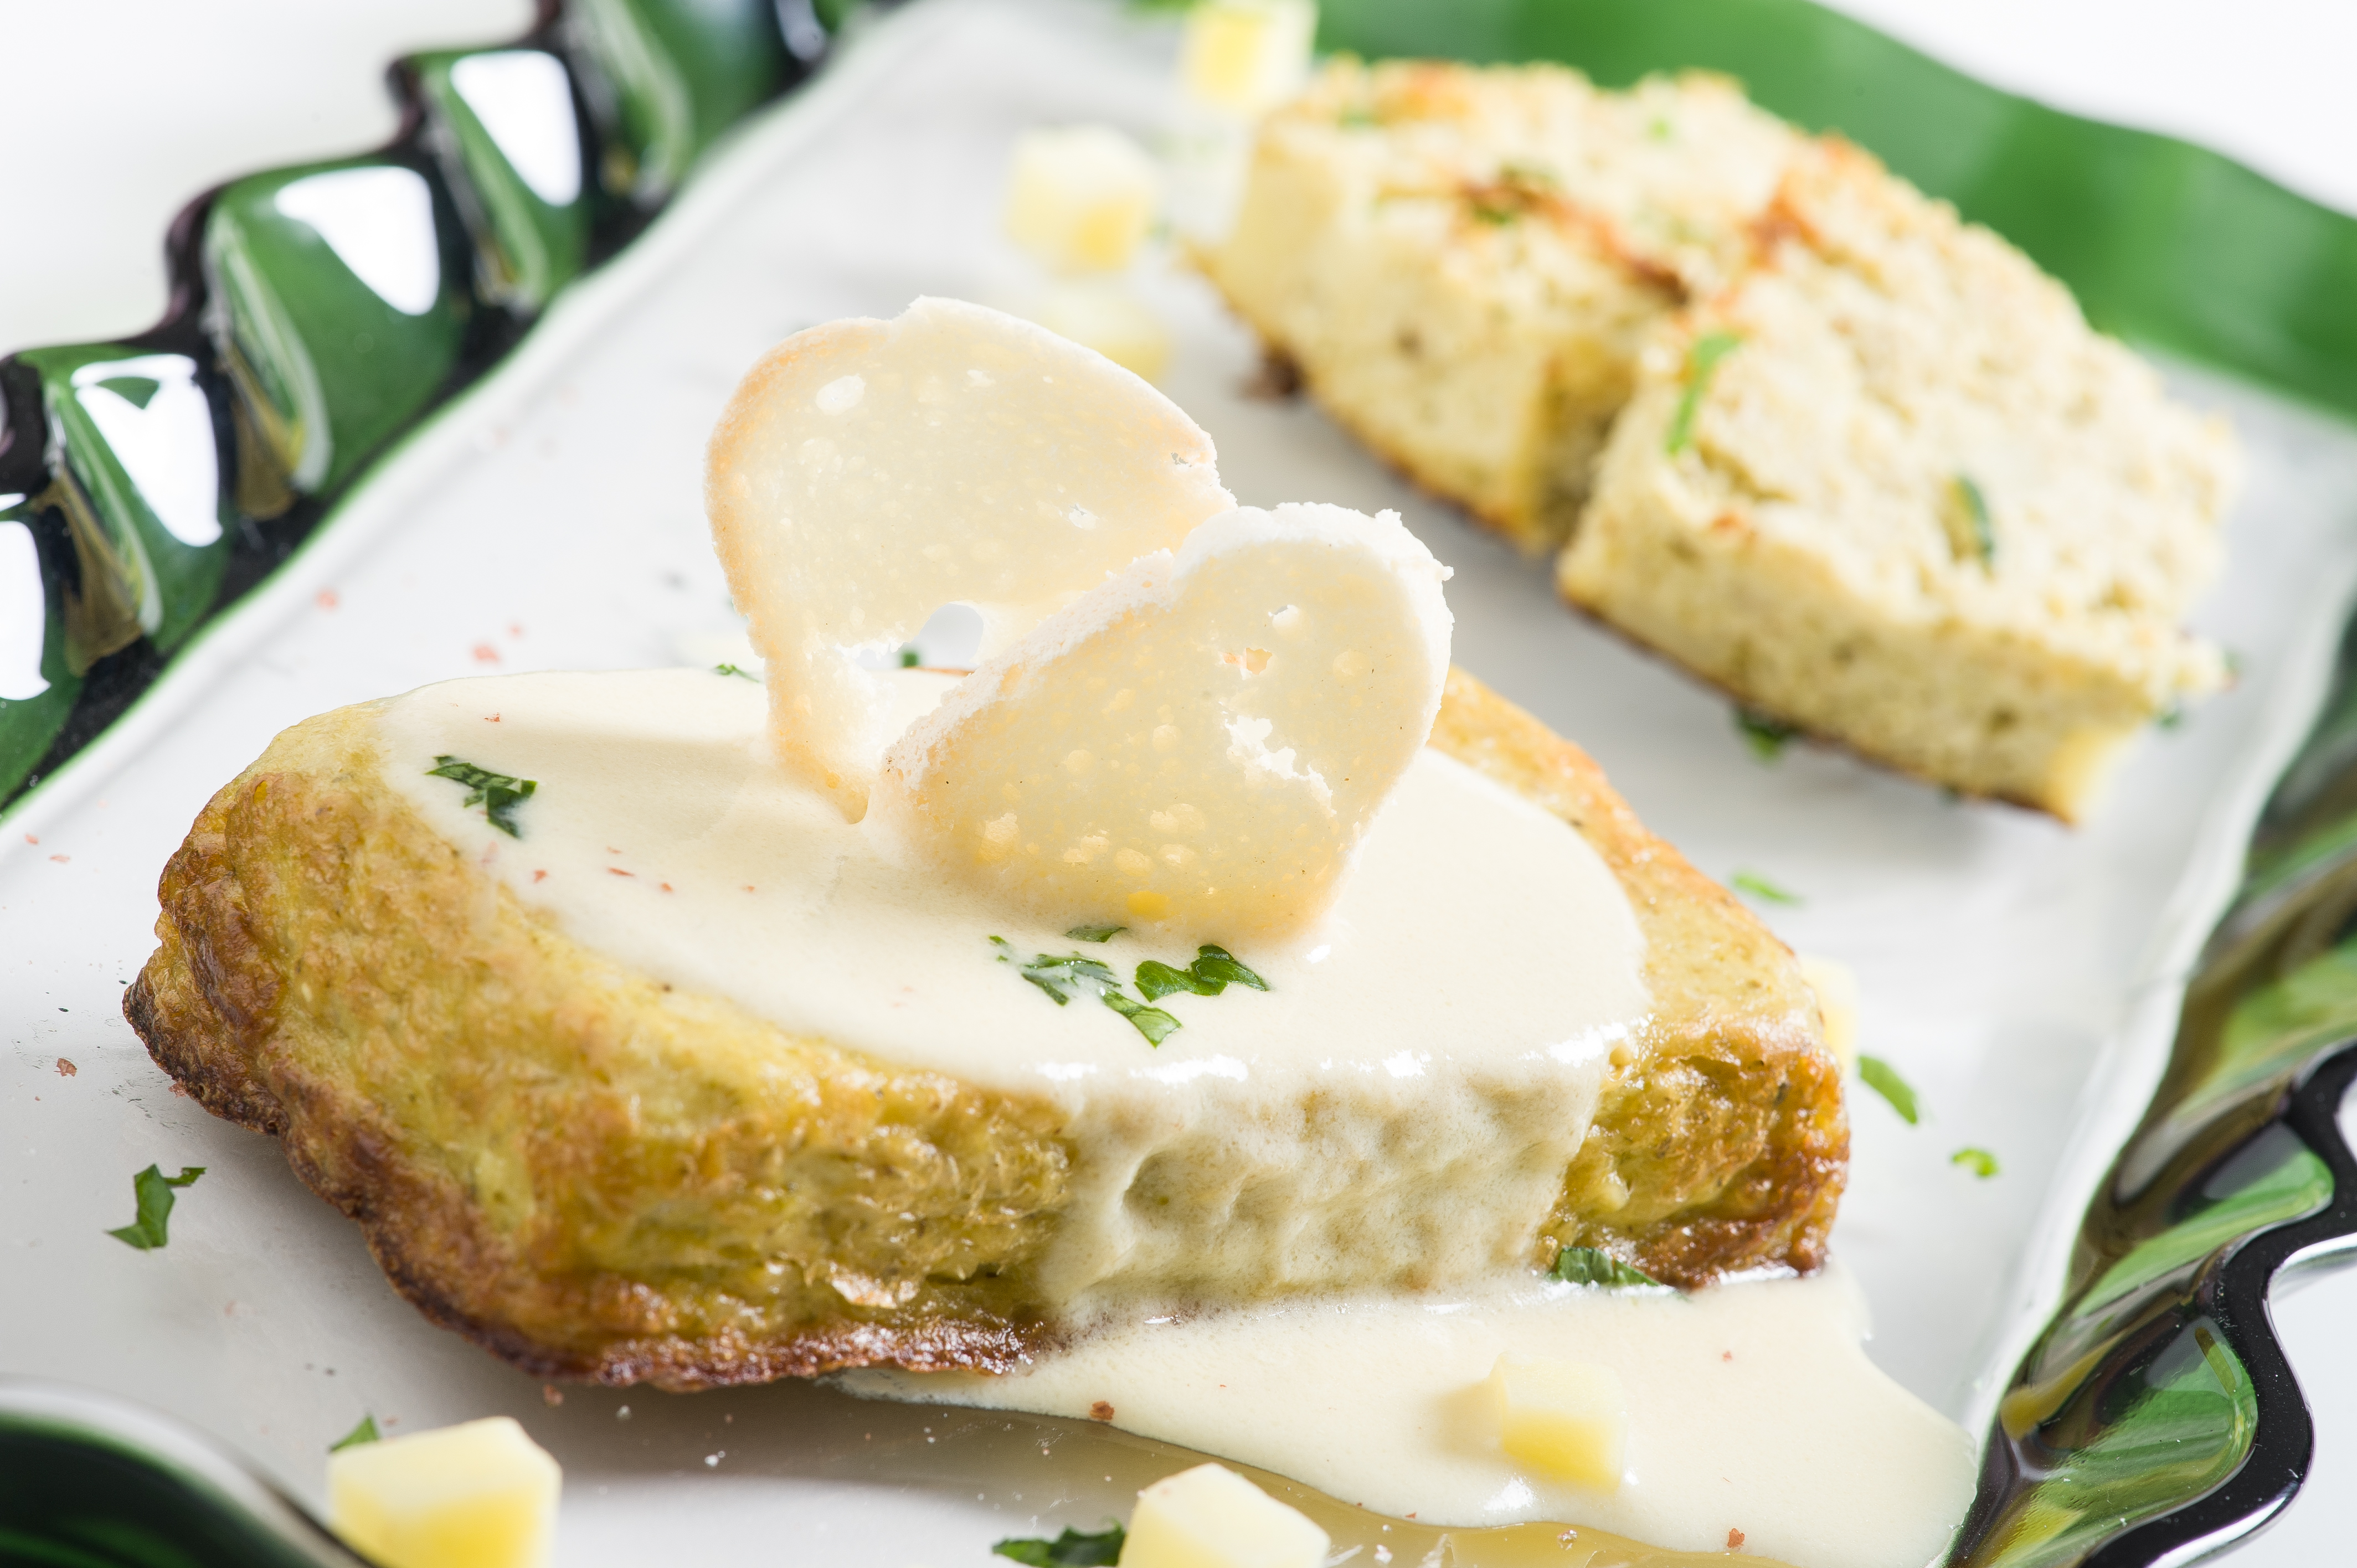 Zucchini flan, gluten-free millet and potatoes with Val d'Aosta fondue